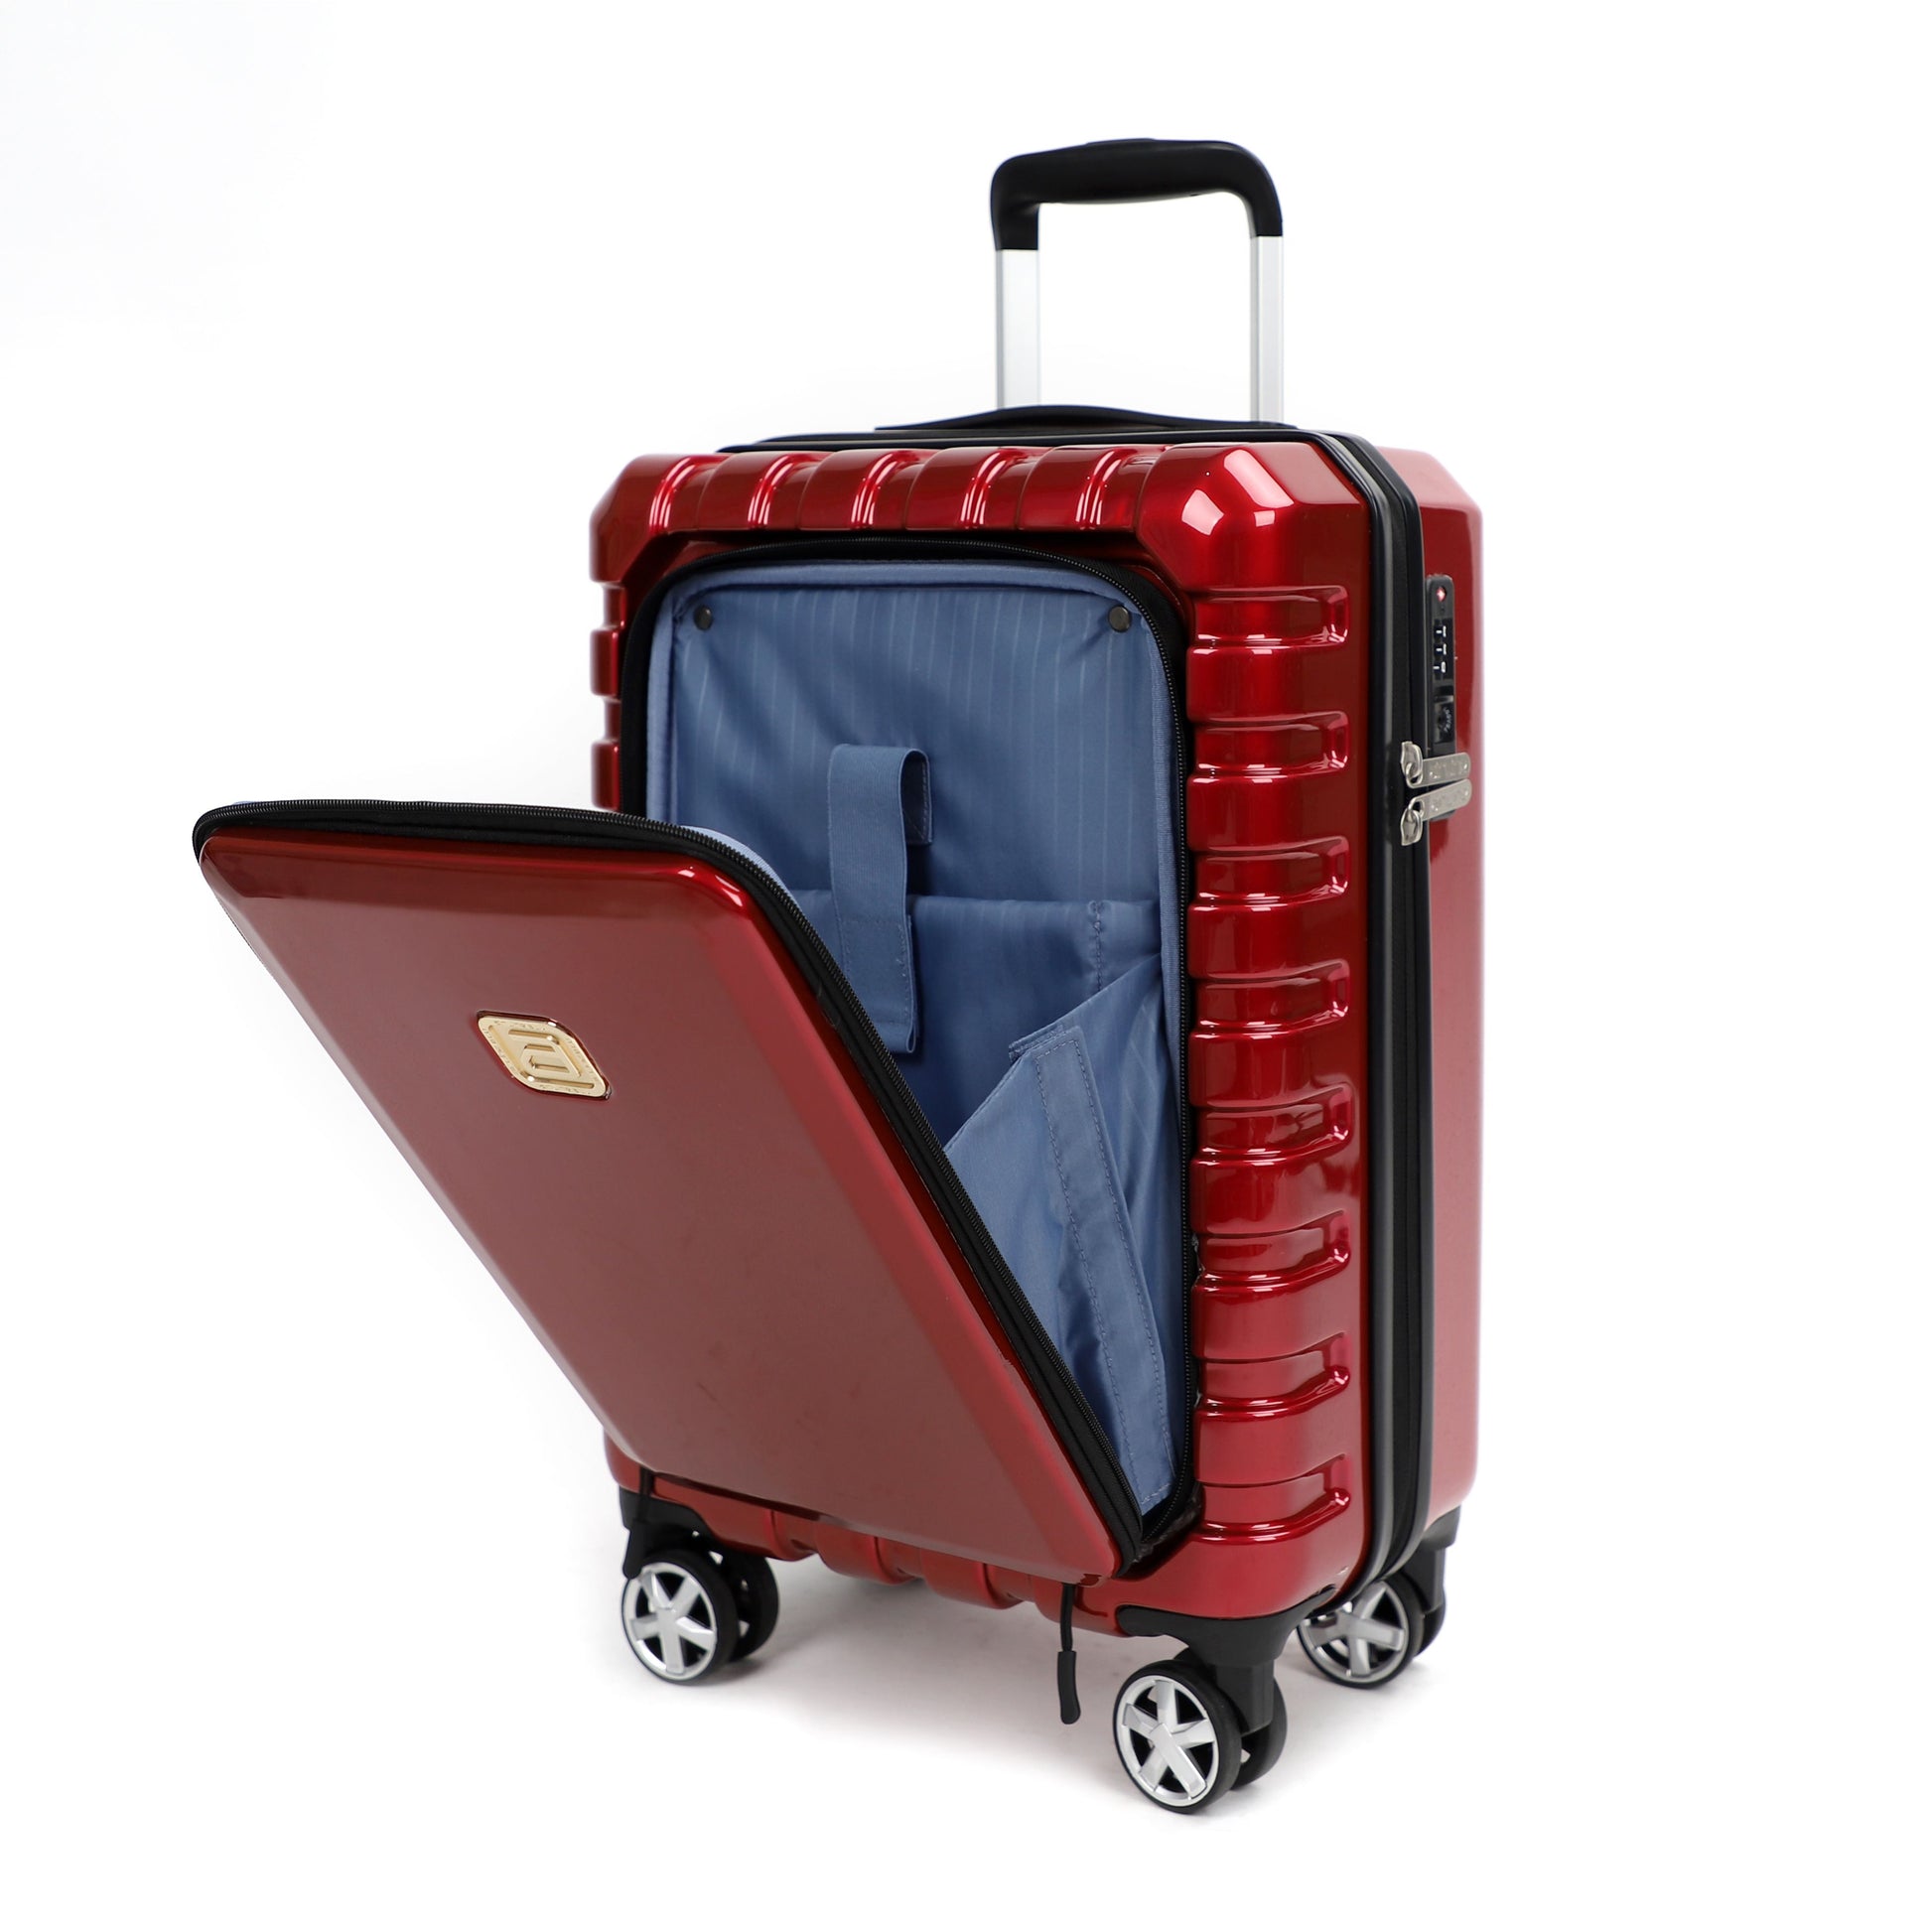 Airline_Carry_On_Luggage_Red_Side_view_02T1978155002